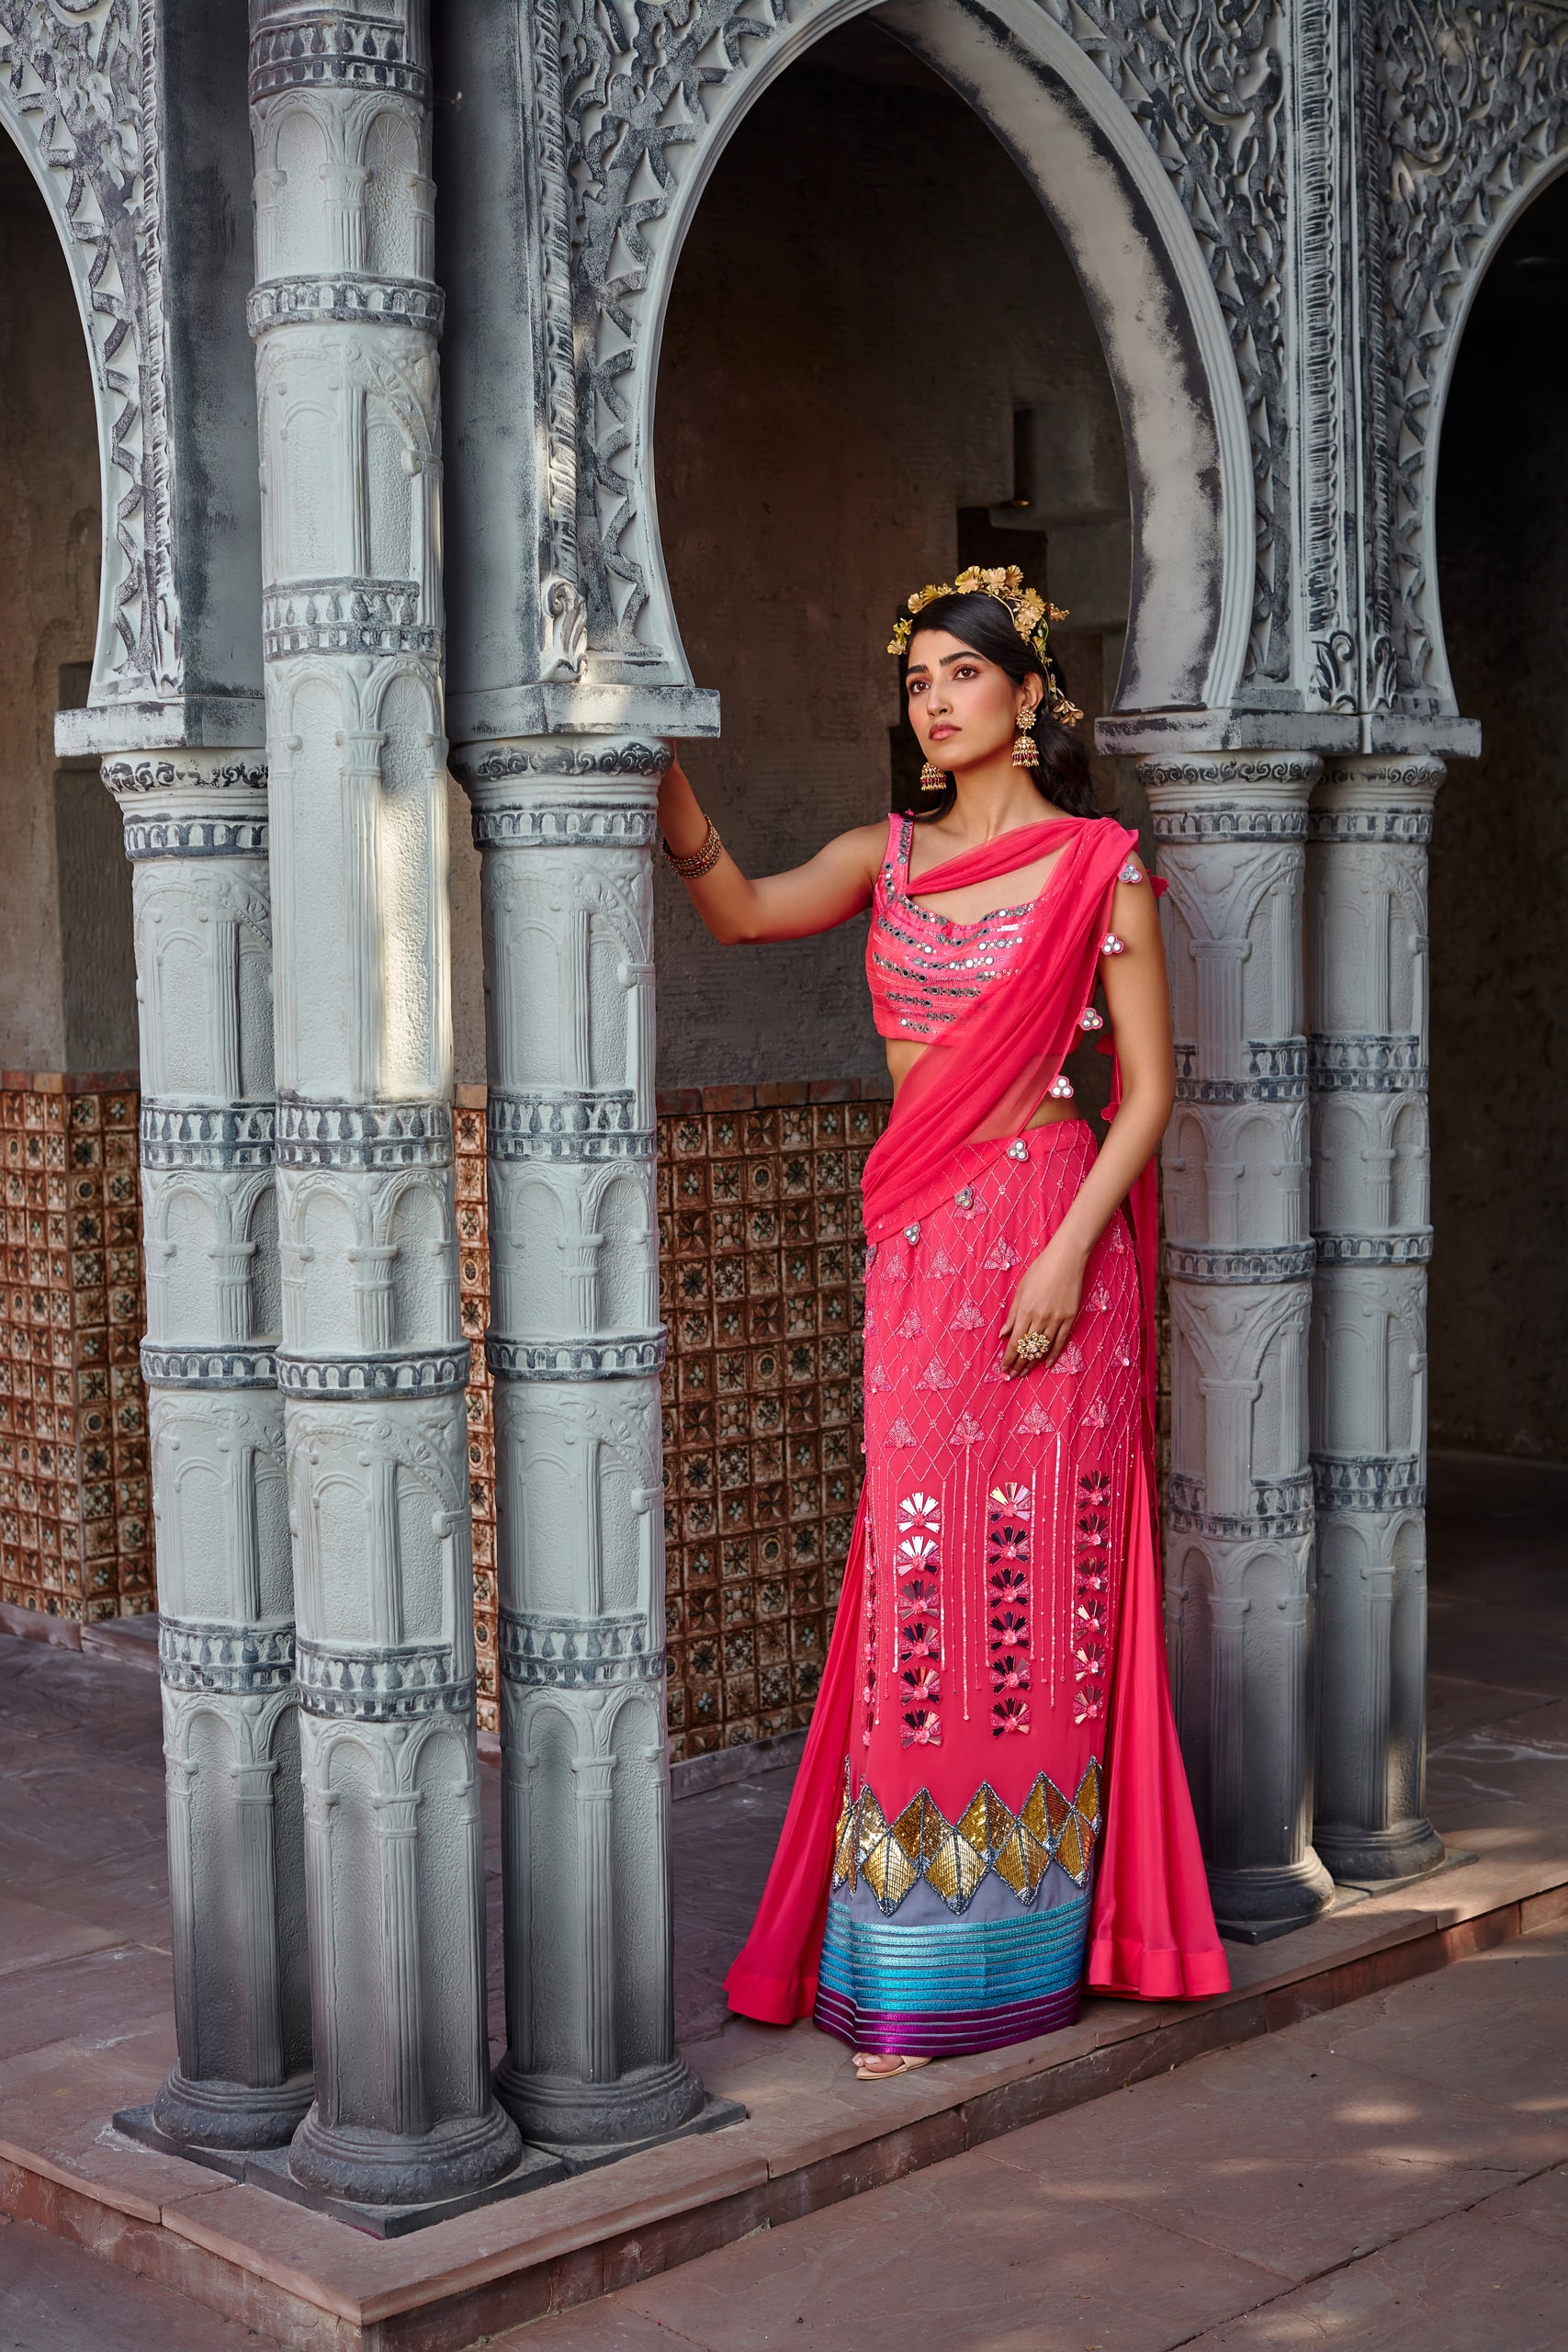 Handcrafted weaves in hot pink that marry tradition with elegance.